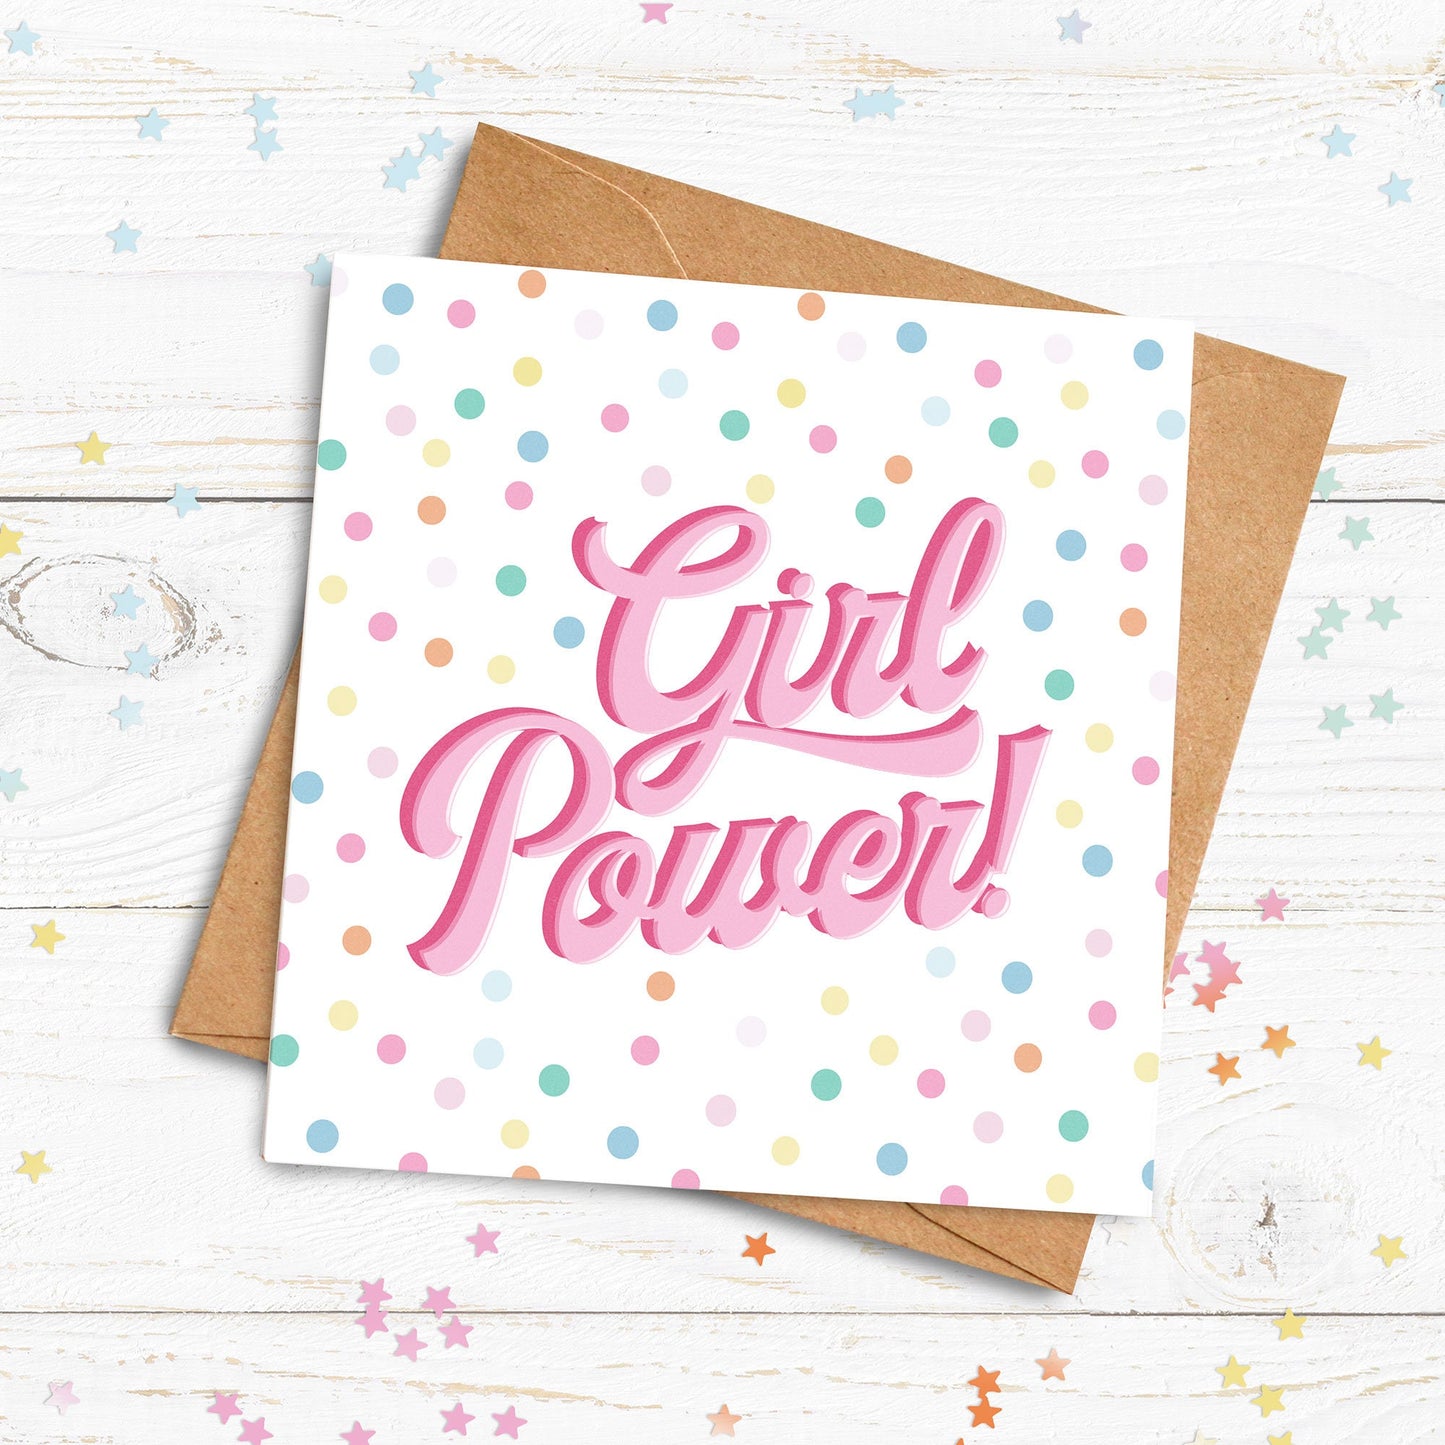 Girl Power Card. Well Done Card. Passed Exams Card. Congratulations. New Job. Send Direct Option.